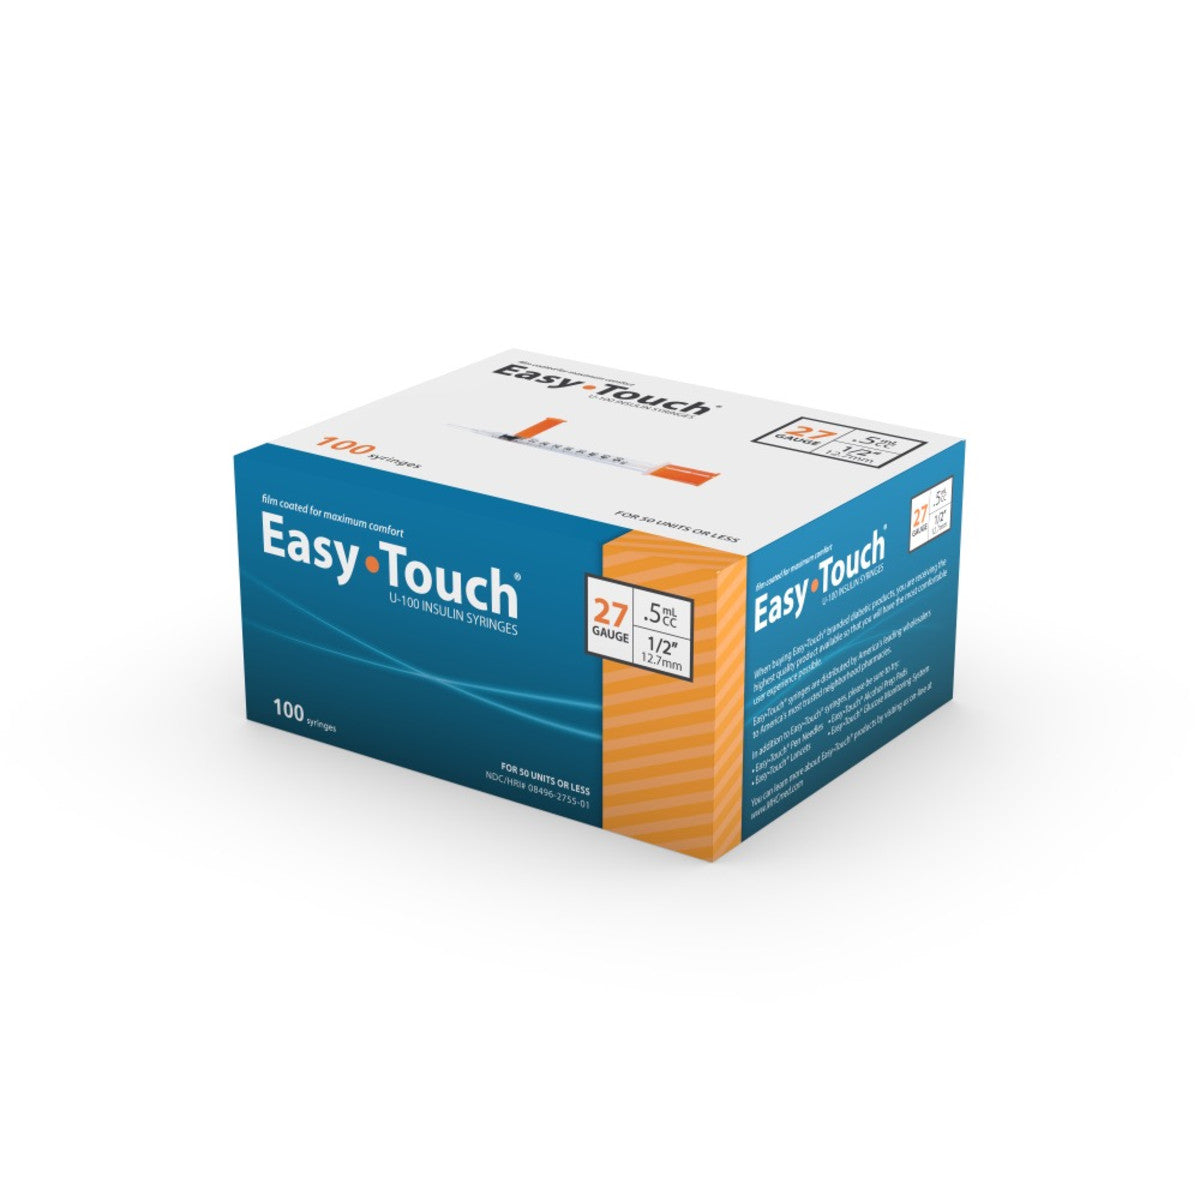 Easy Touch Insulin Syringe, 27G .5cc 1/2-Inch (12.7mm), 827555, Box of 100